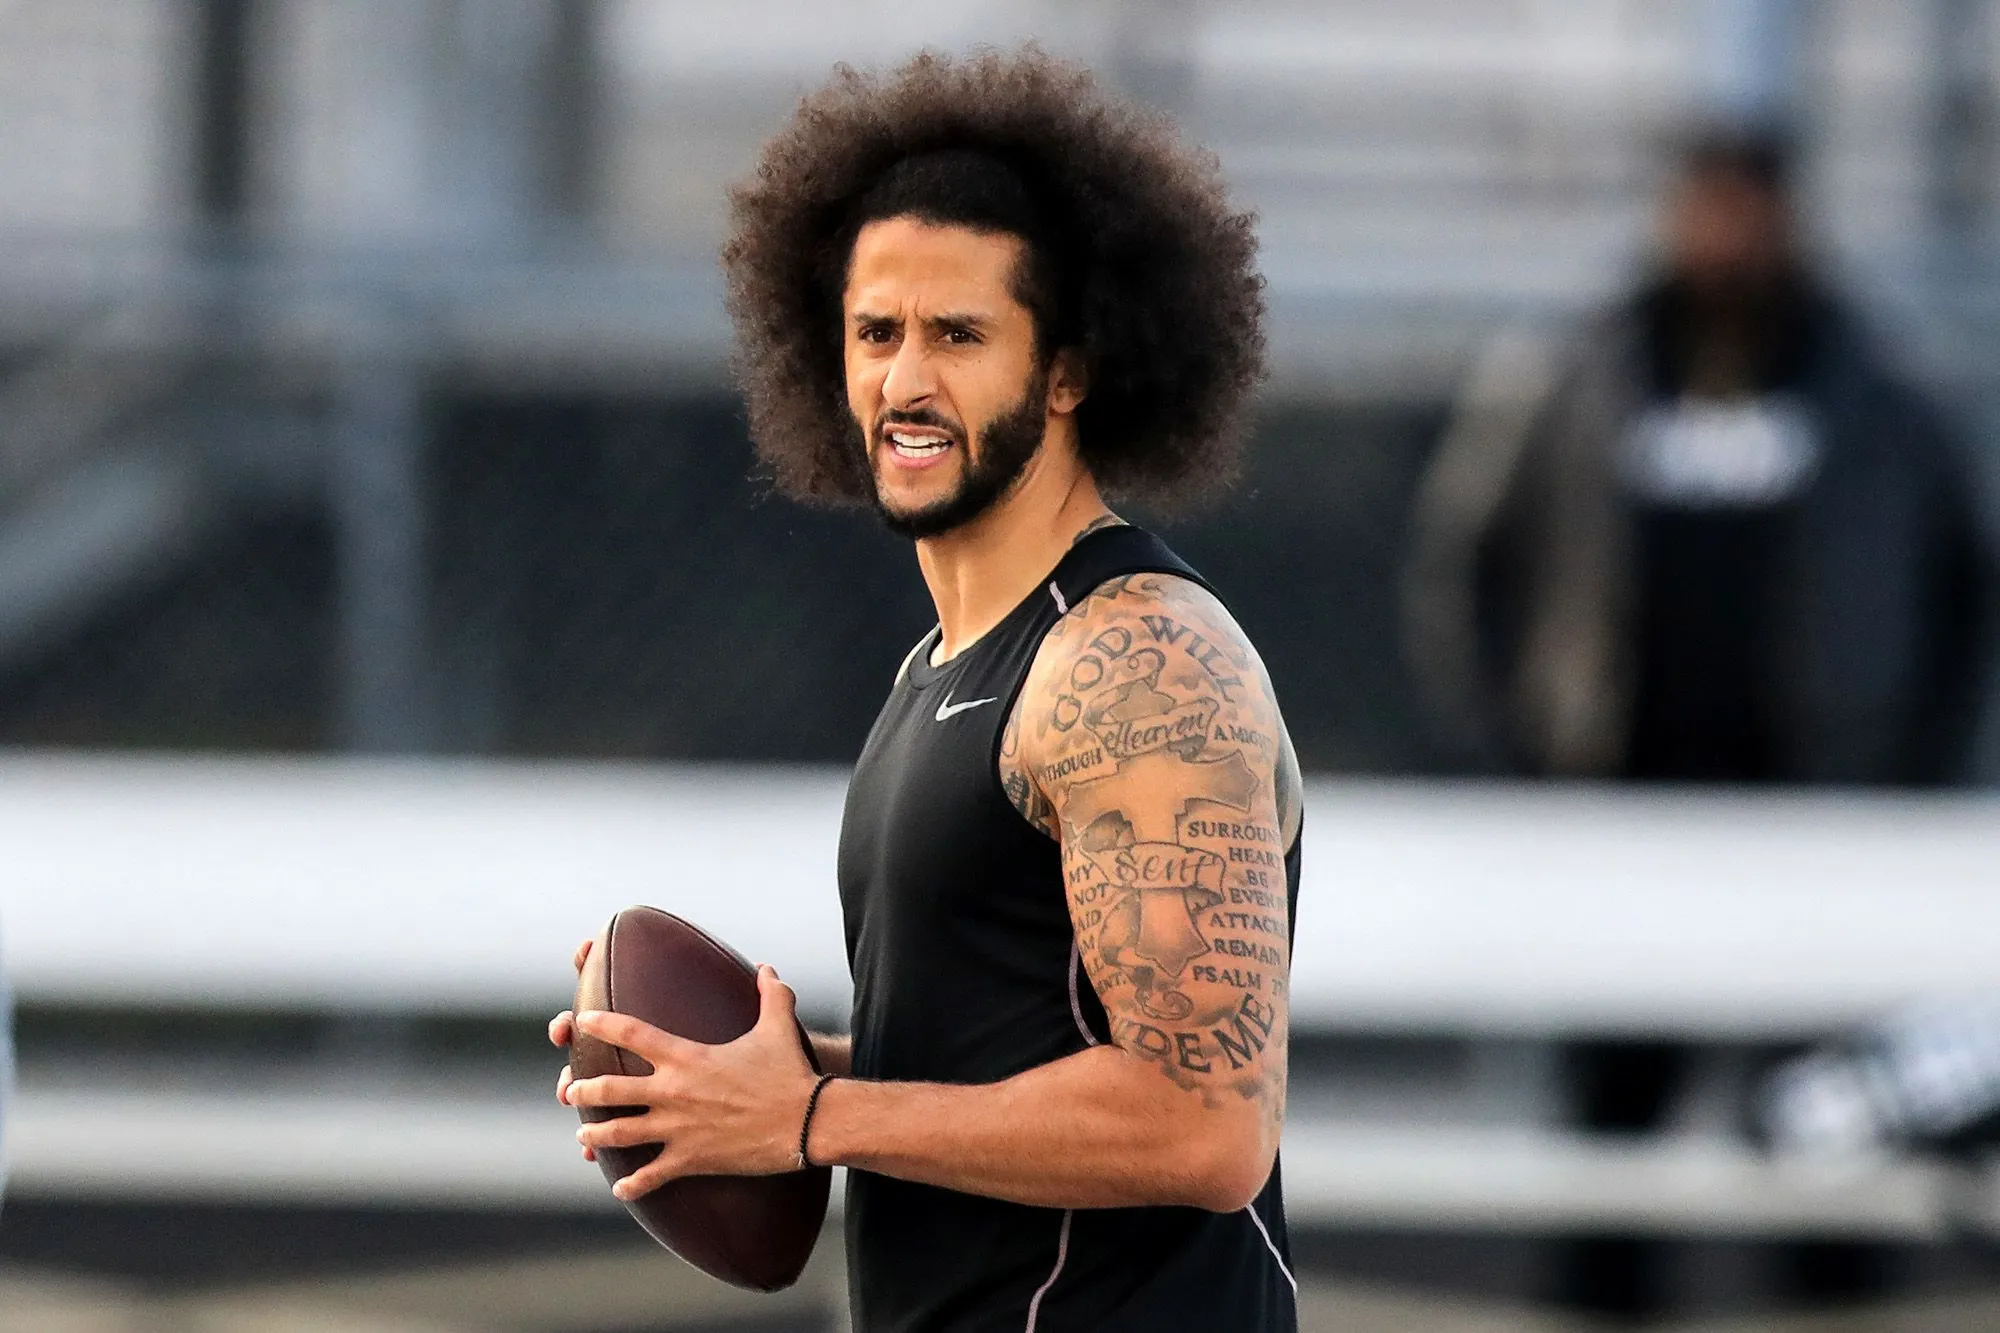 What College did Colin Kaepernick Go to?